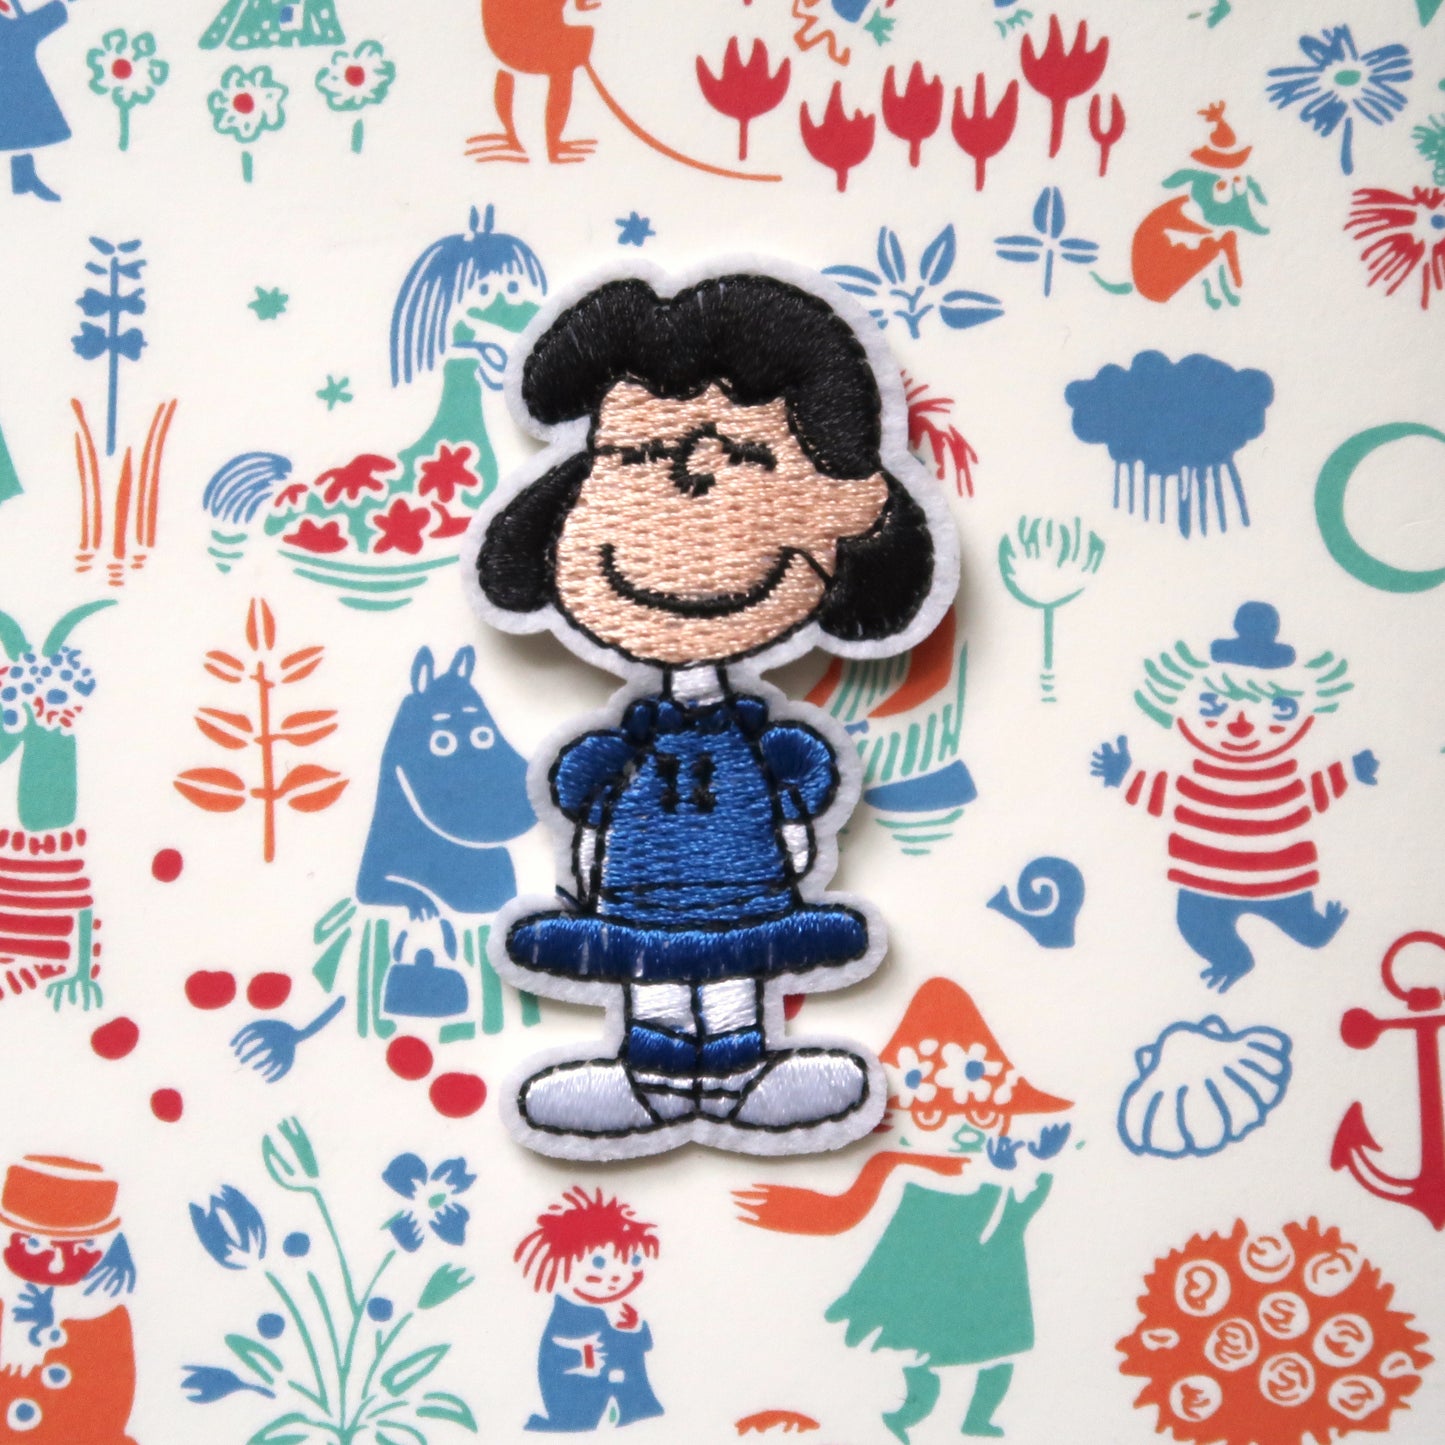 Snoopy Embroidery Patch // Lucy van Pelt from the Snoopy/Peanuts comics embroidered iron-on patch badge appliqué